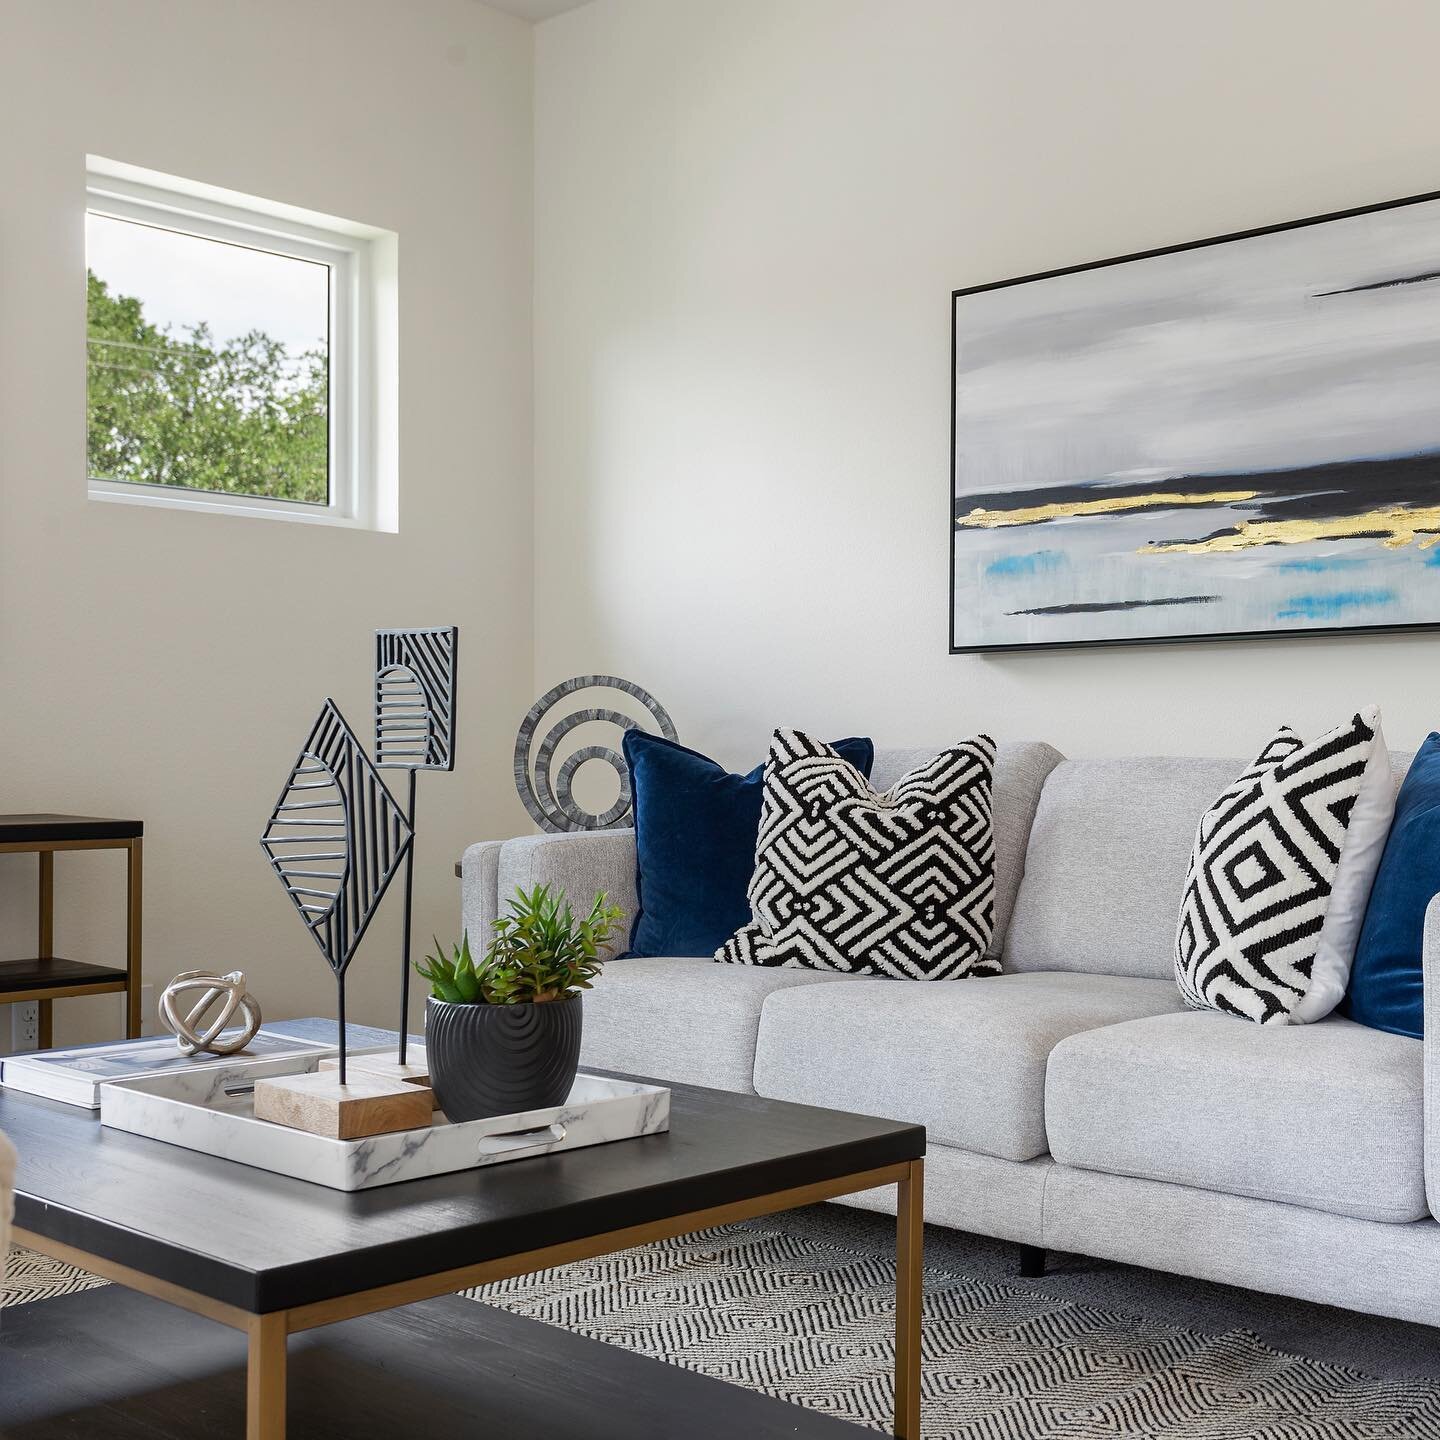 Even in crazy hot market such as Austin, staging is still a MUST if you are looking for top dollar on your home. 

Make sure you aren&rsquo;t leaving money on the table, contact us for a complimentary quote on your listing! 
.
.
.
.
.
#austinstaging 